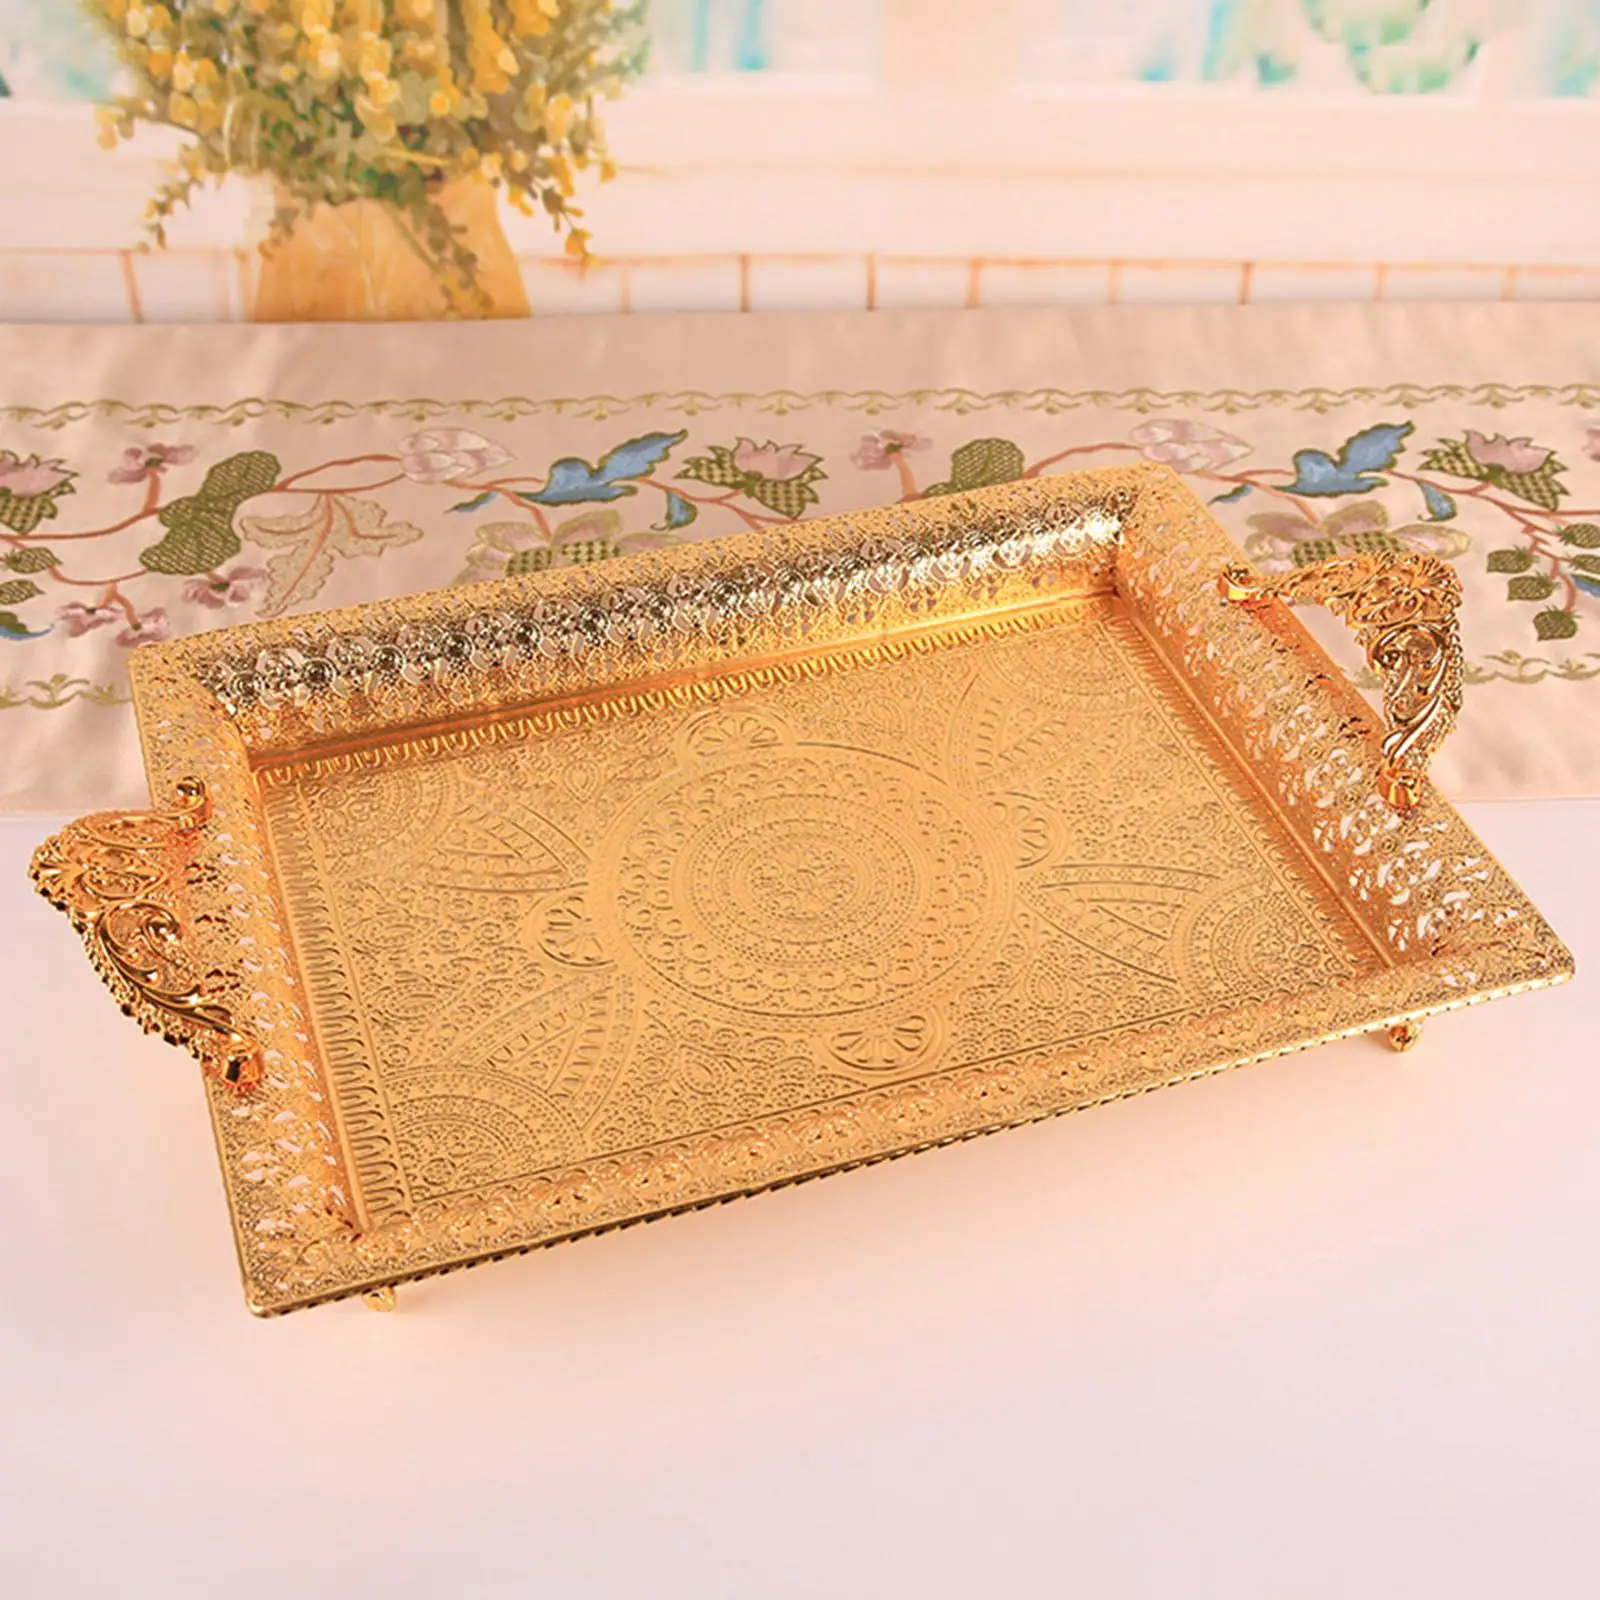 Iron Serving Tray, Bread Tray Display Tray Fruit Plate Jewelry Tray Makeup Organizer for Bathroom Dressing Room Party Decoration